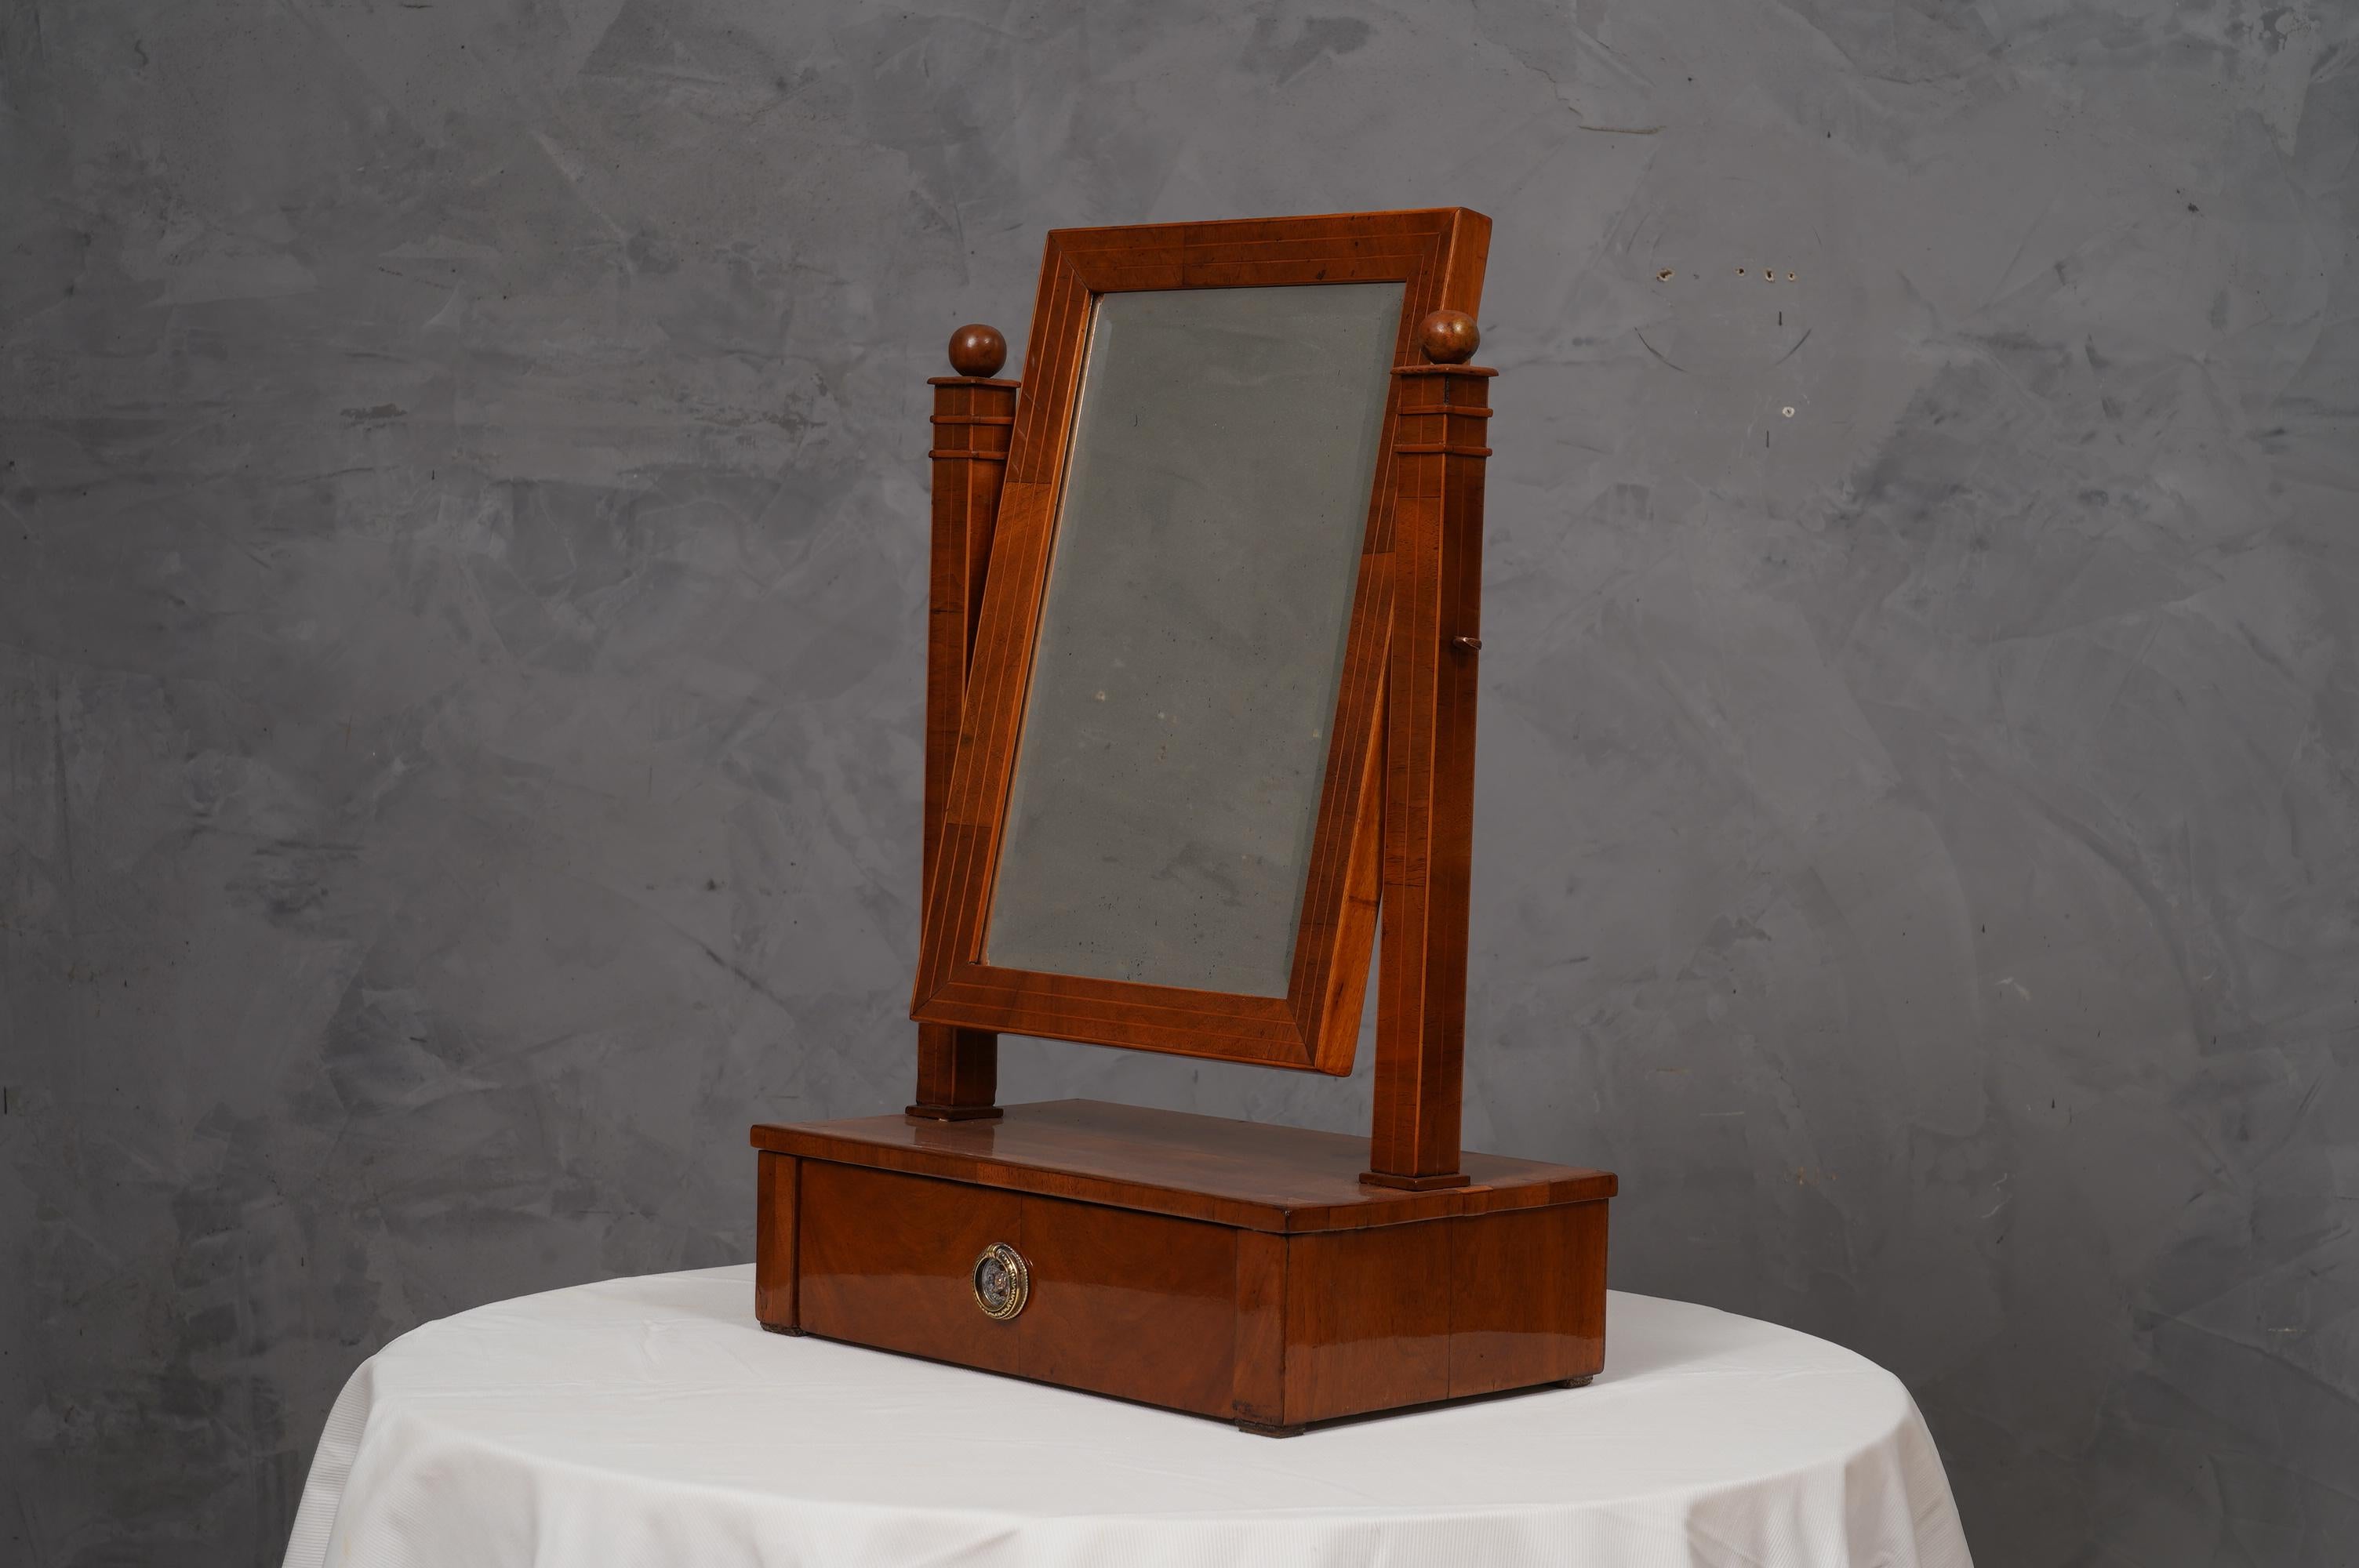 Beautiful and very special Biedermeier vanity mirror, refined and classy with a very simple design.

The mirror is formed by a structure in soft wood, which has been veneered in cherry wood. Its structure is very simple, under a base with a small